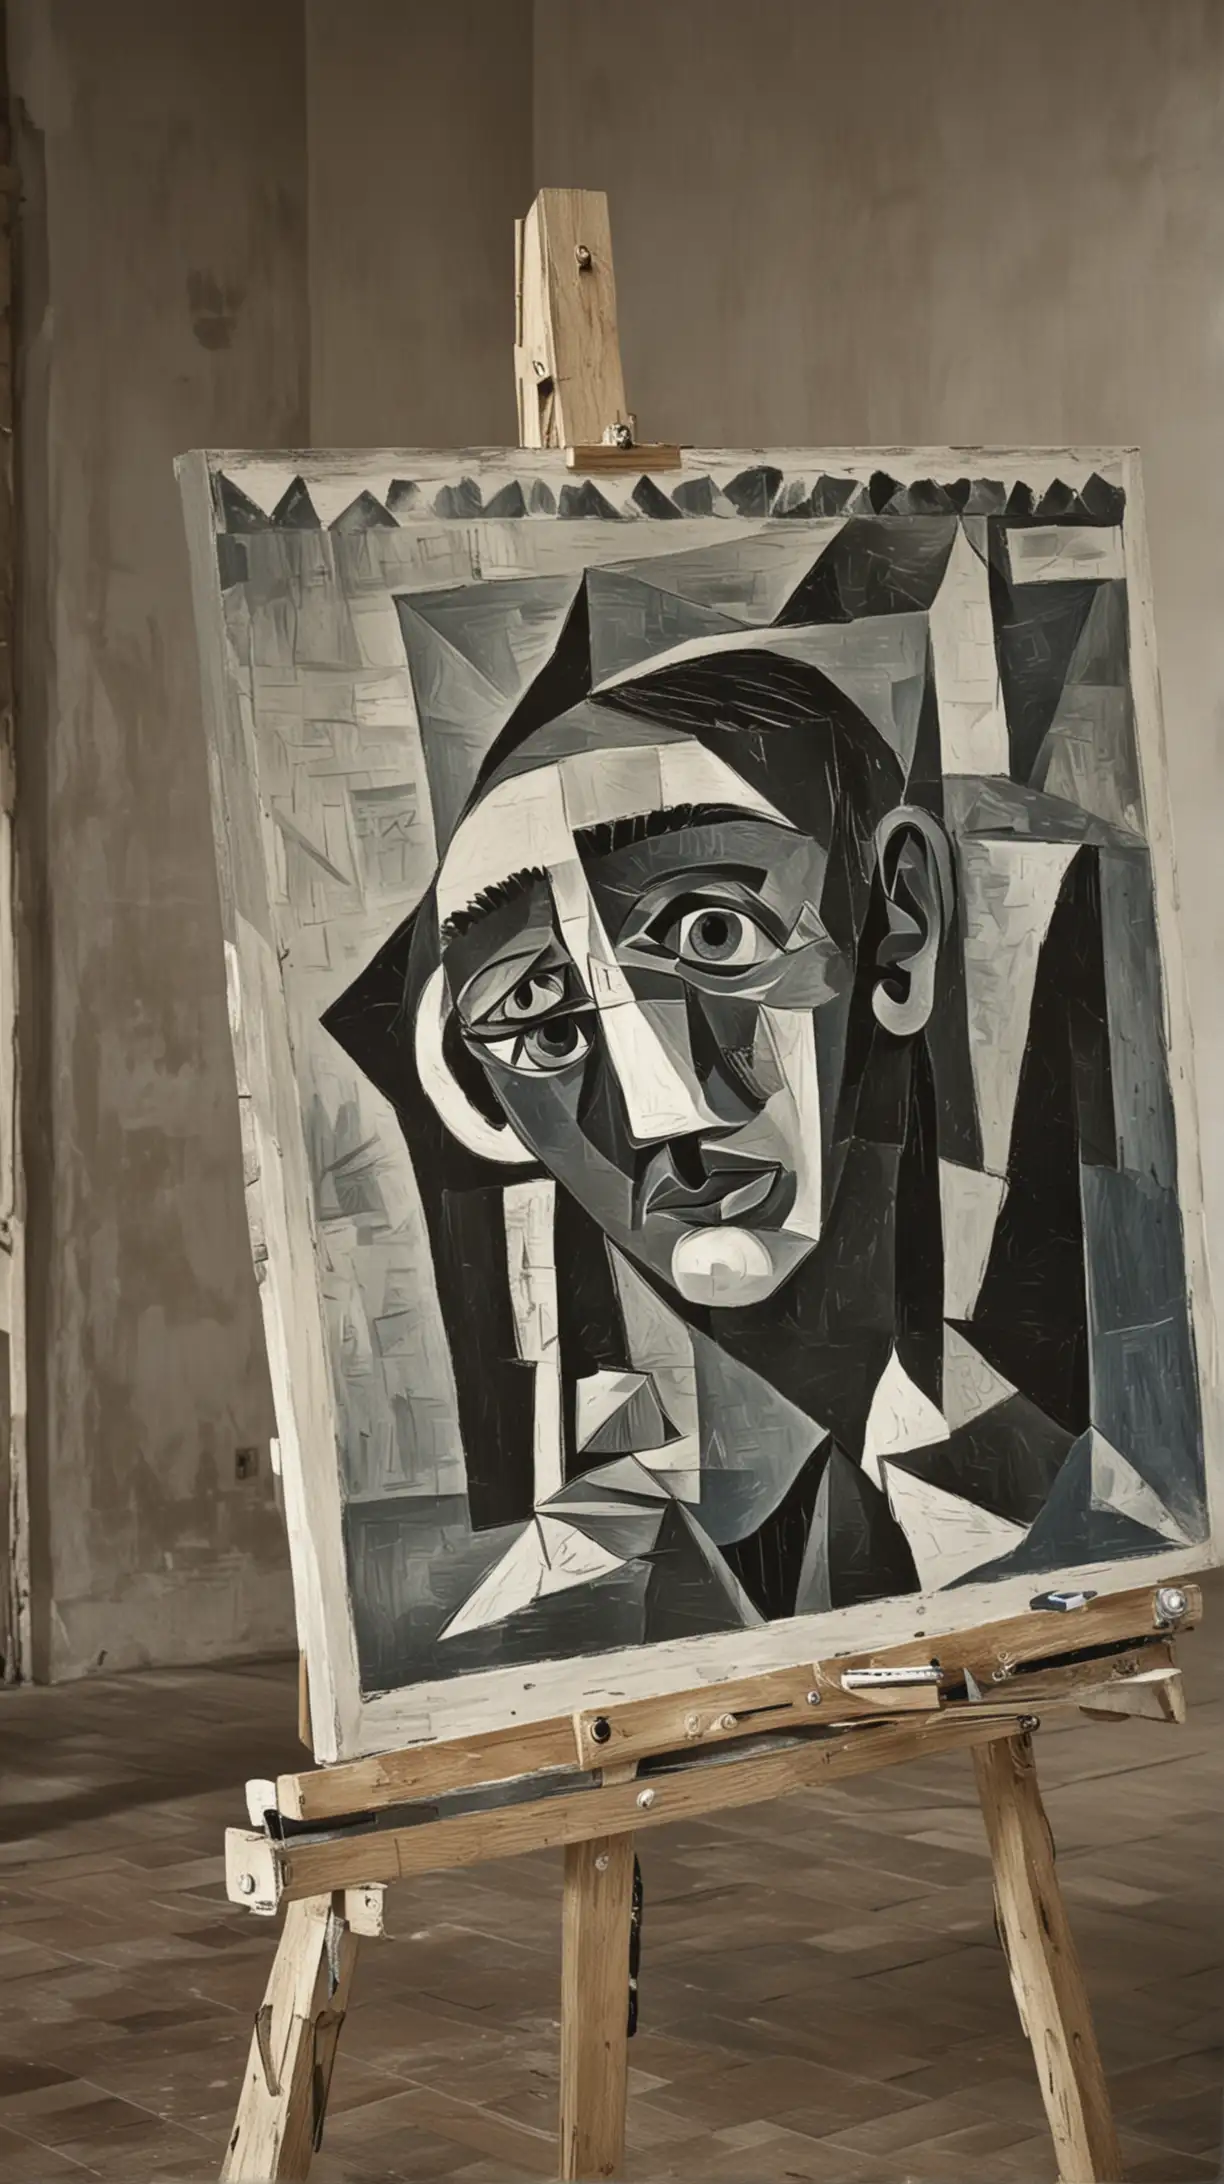 Abstract Painting by Pablo Picasso in Cubist Style